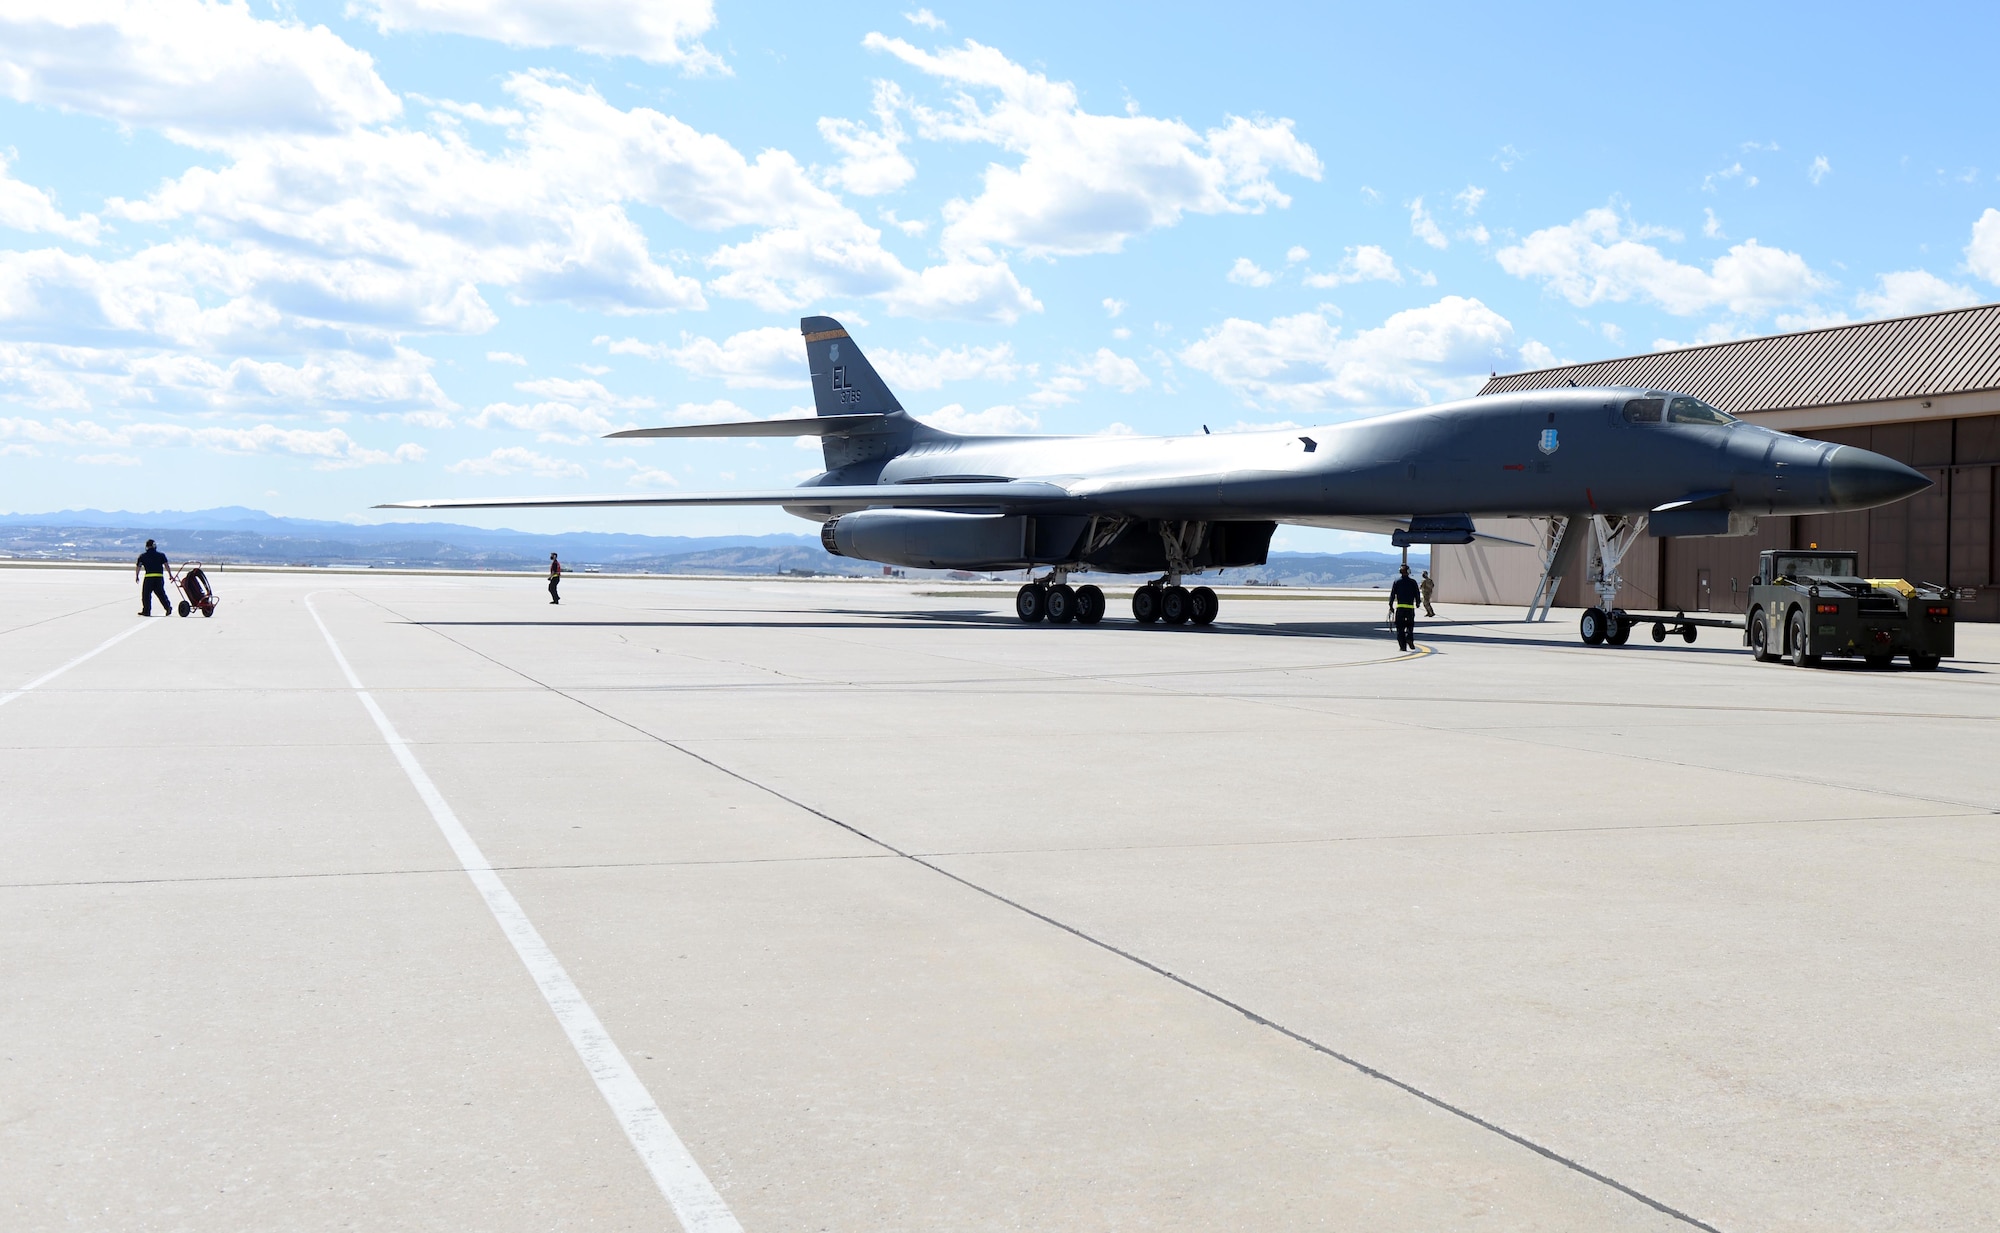 A B-1B Lancer is towed to a parking spot on the apron of the airfield at Ellsworth Air Force Base, S.D., April 22, 2020.